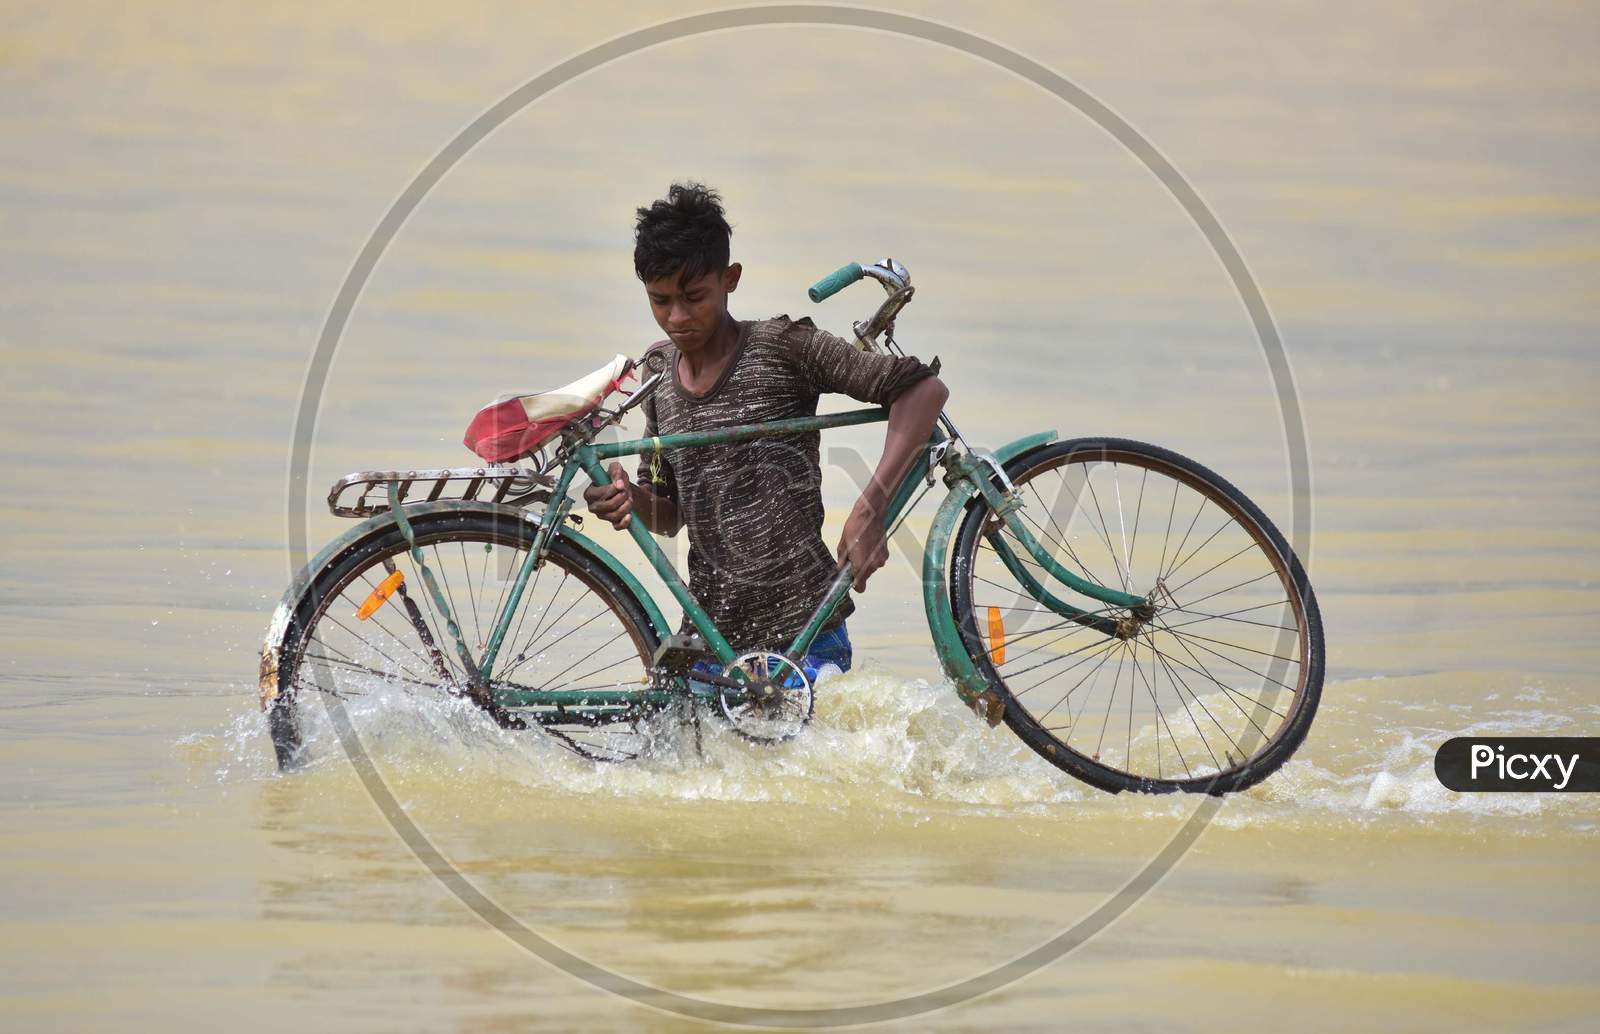 A Villager Carries His Bicycle As He Wades Through A Flooded Road In Hojai District Of Assam On May 30,2020.